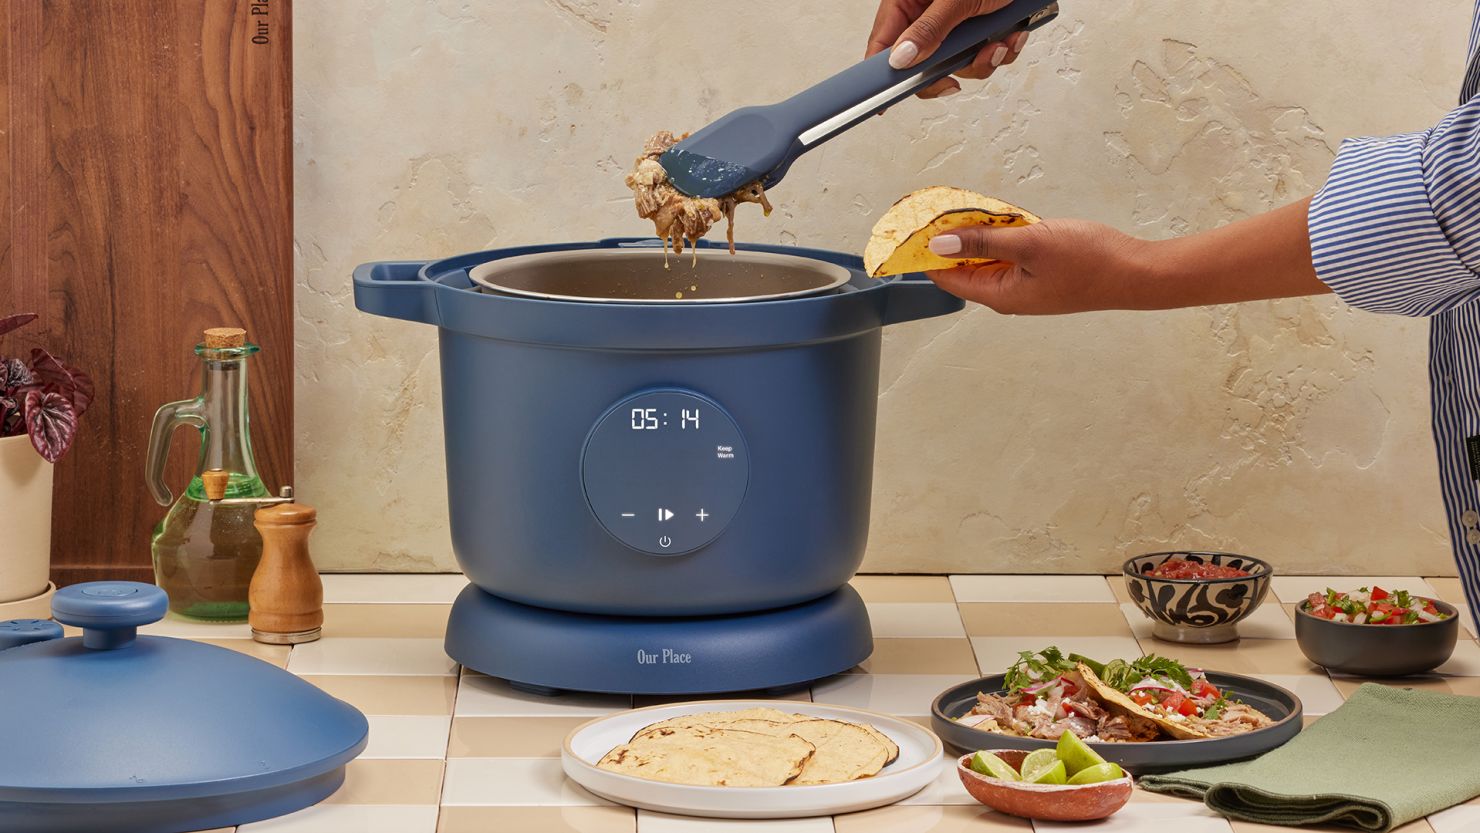 Enhance Your Home Cooking Experience with Must-Have Appliances: Rice Cooker,  Slow Cooker, Food Steamer, and